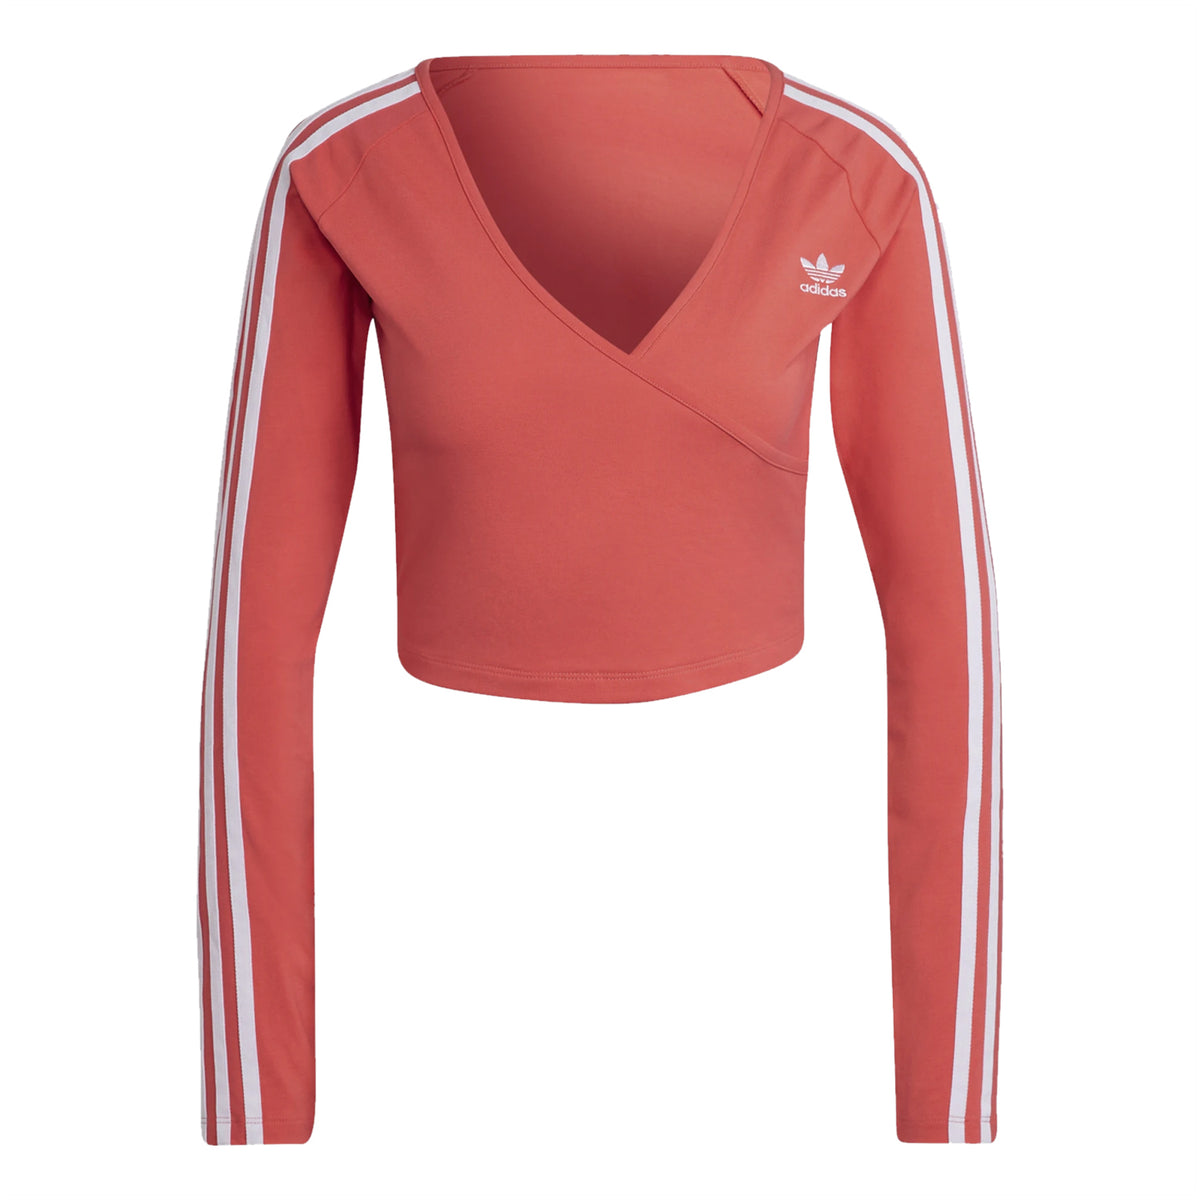 Adidas Long Sleeve Top Womens Style : Hc2050 - NY Tent Sale